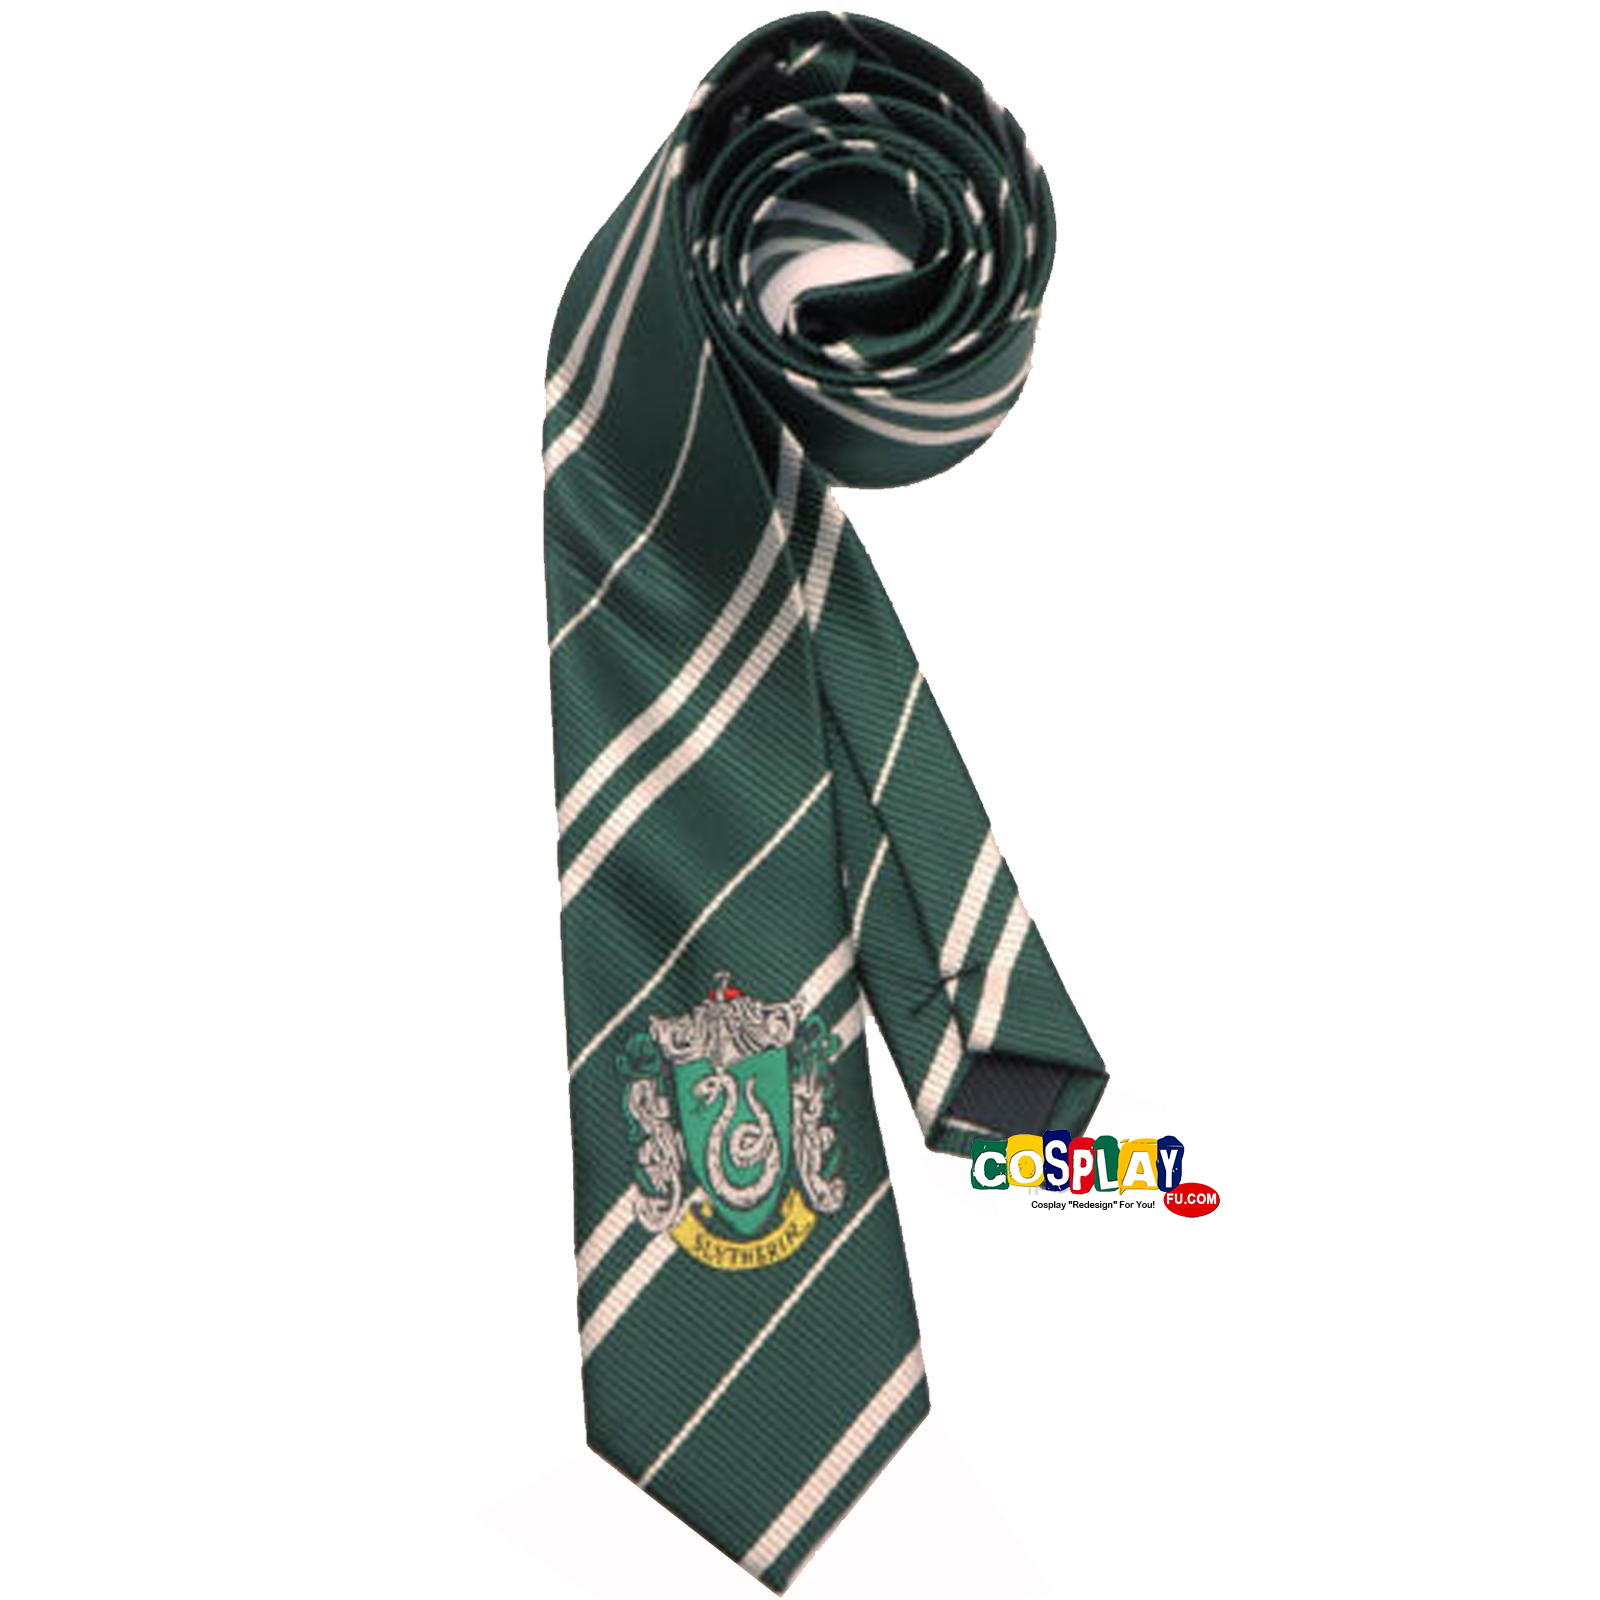 Slytherin Tie from Harry Potter (211)